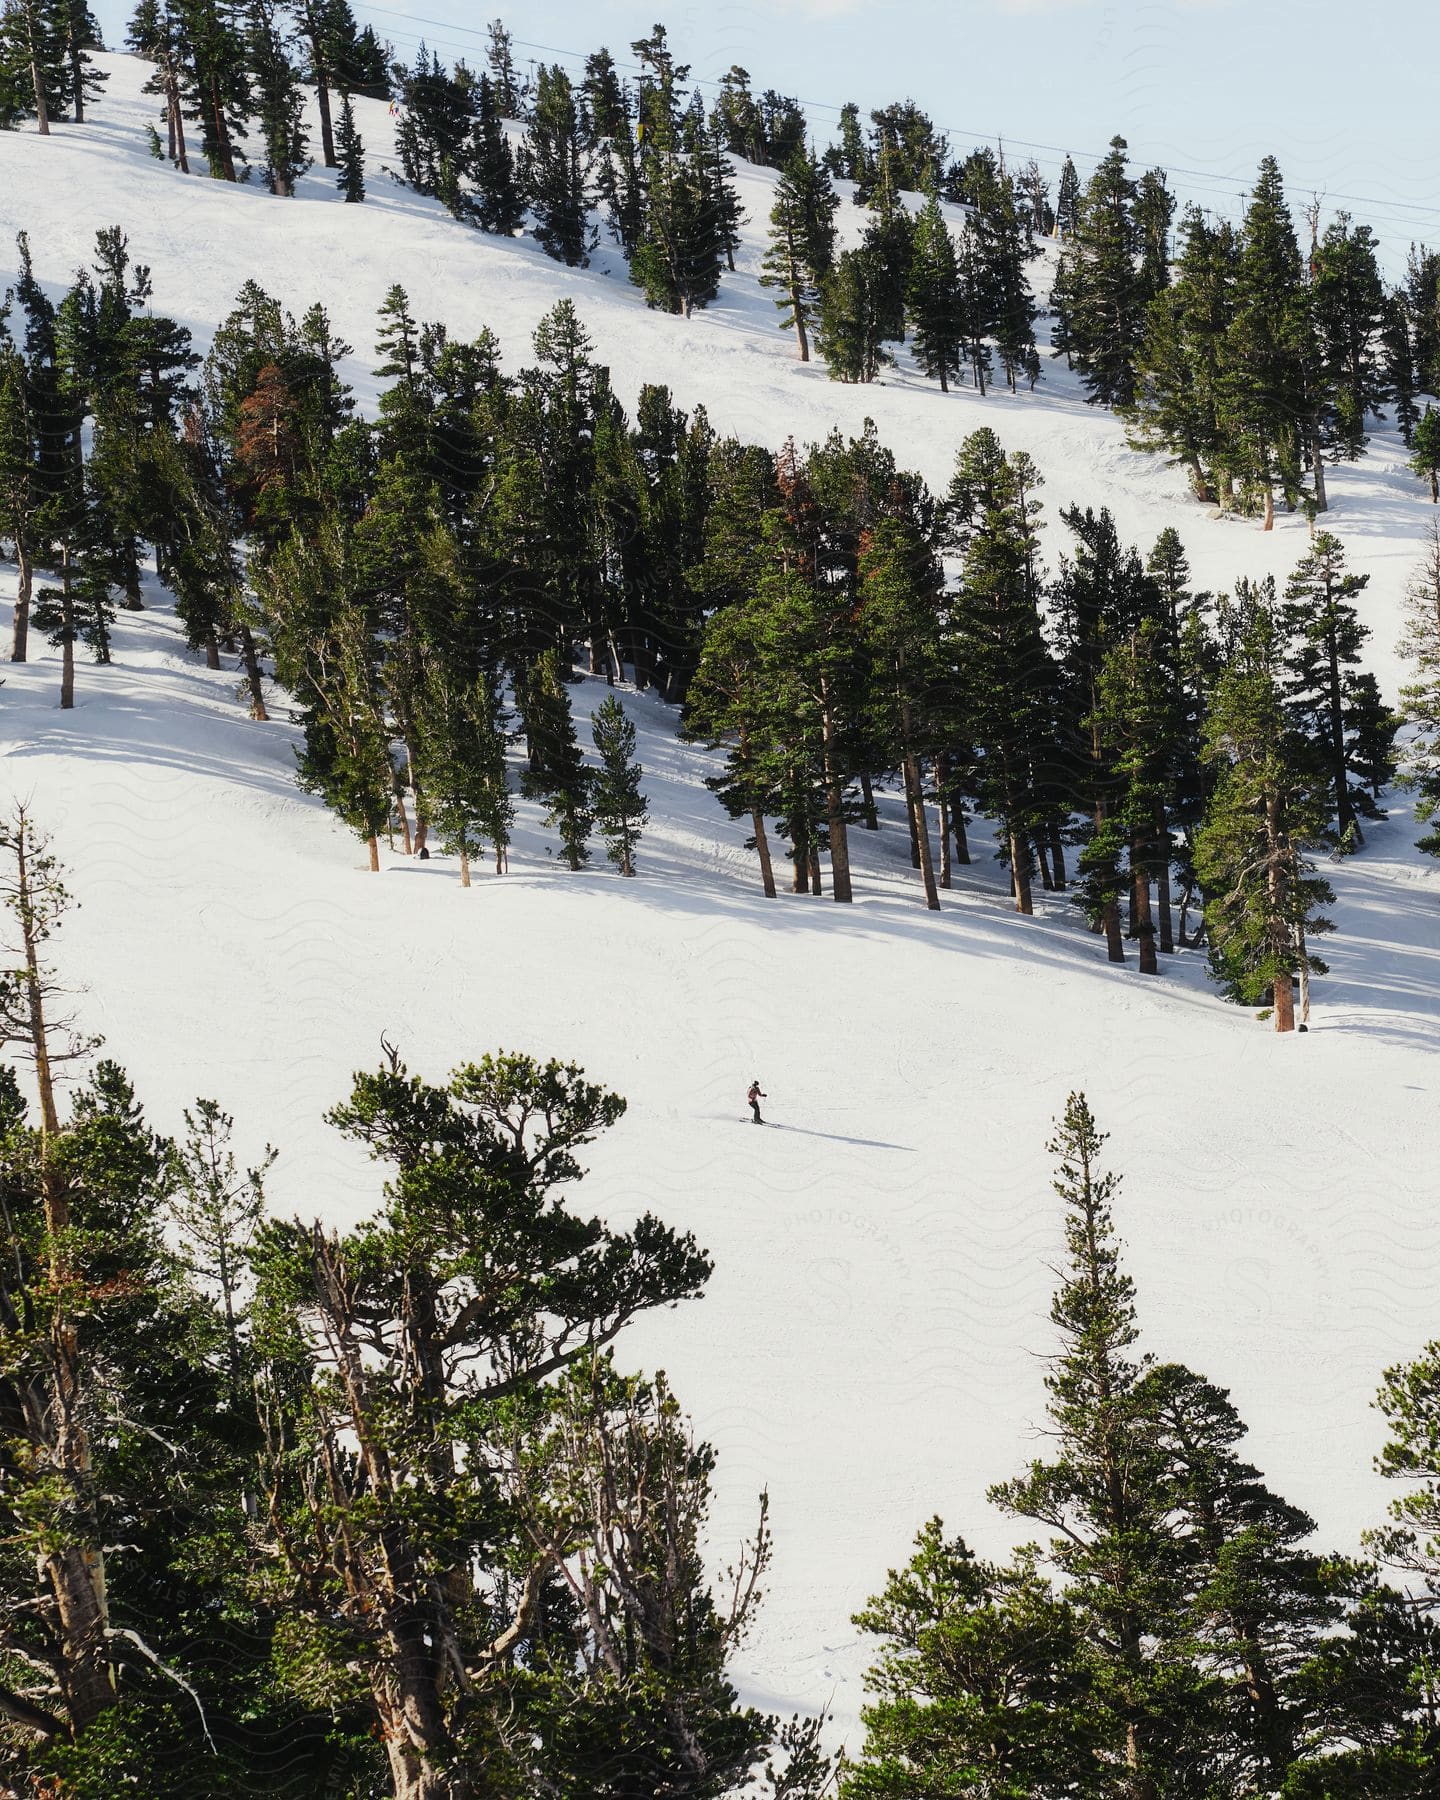 A skier is seen on a snowcovered mountainside among trees on a winter day with the sun shining